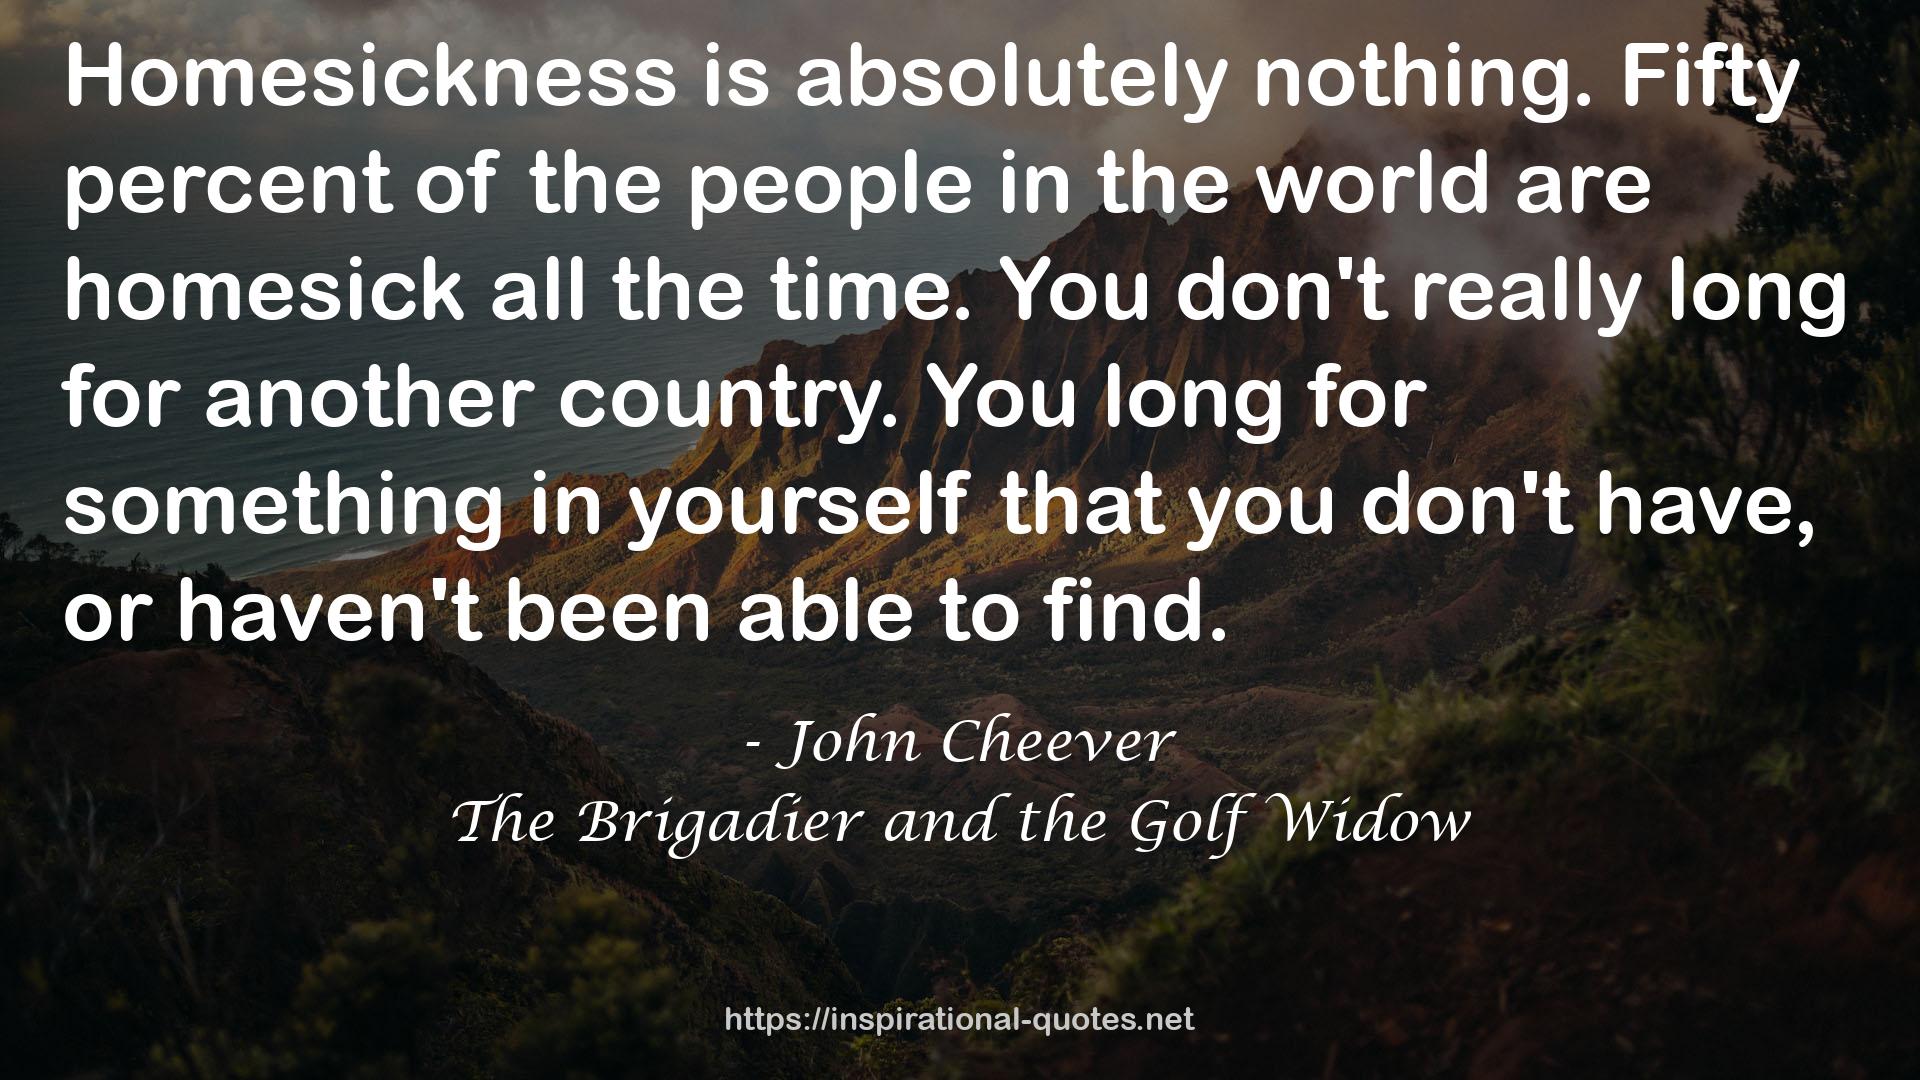 The Brigadier and the Golf Widow QUOTES